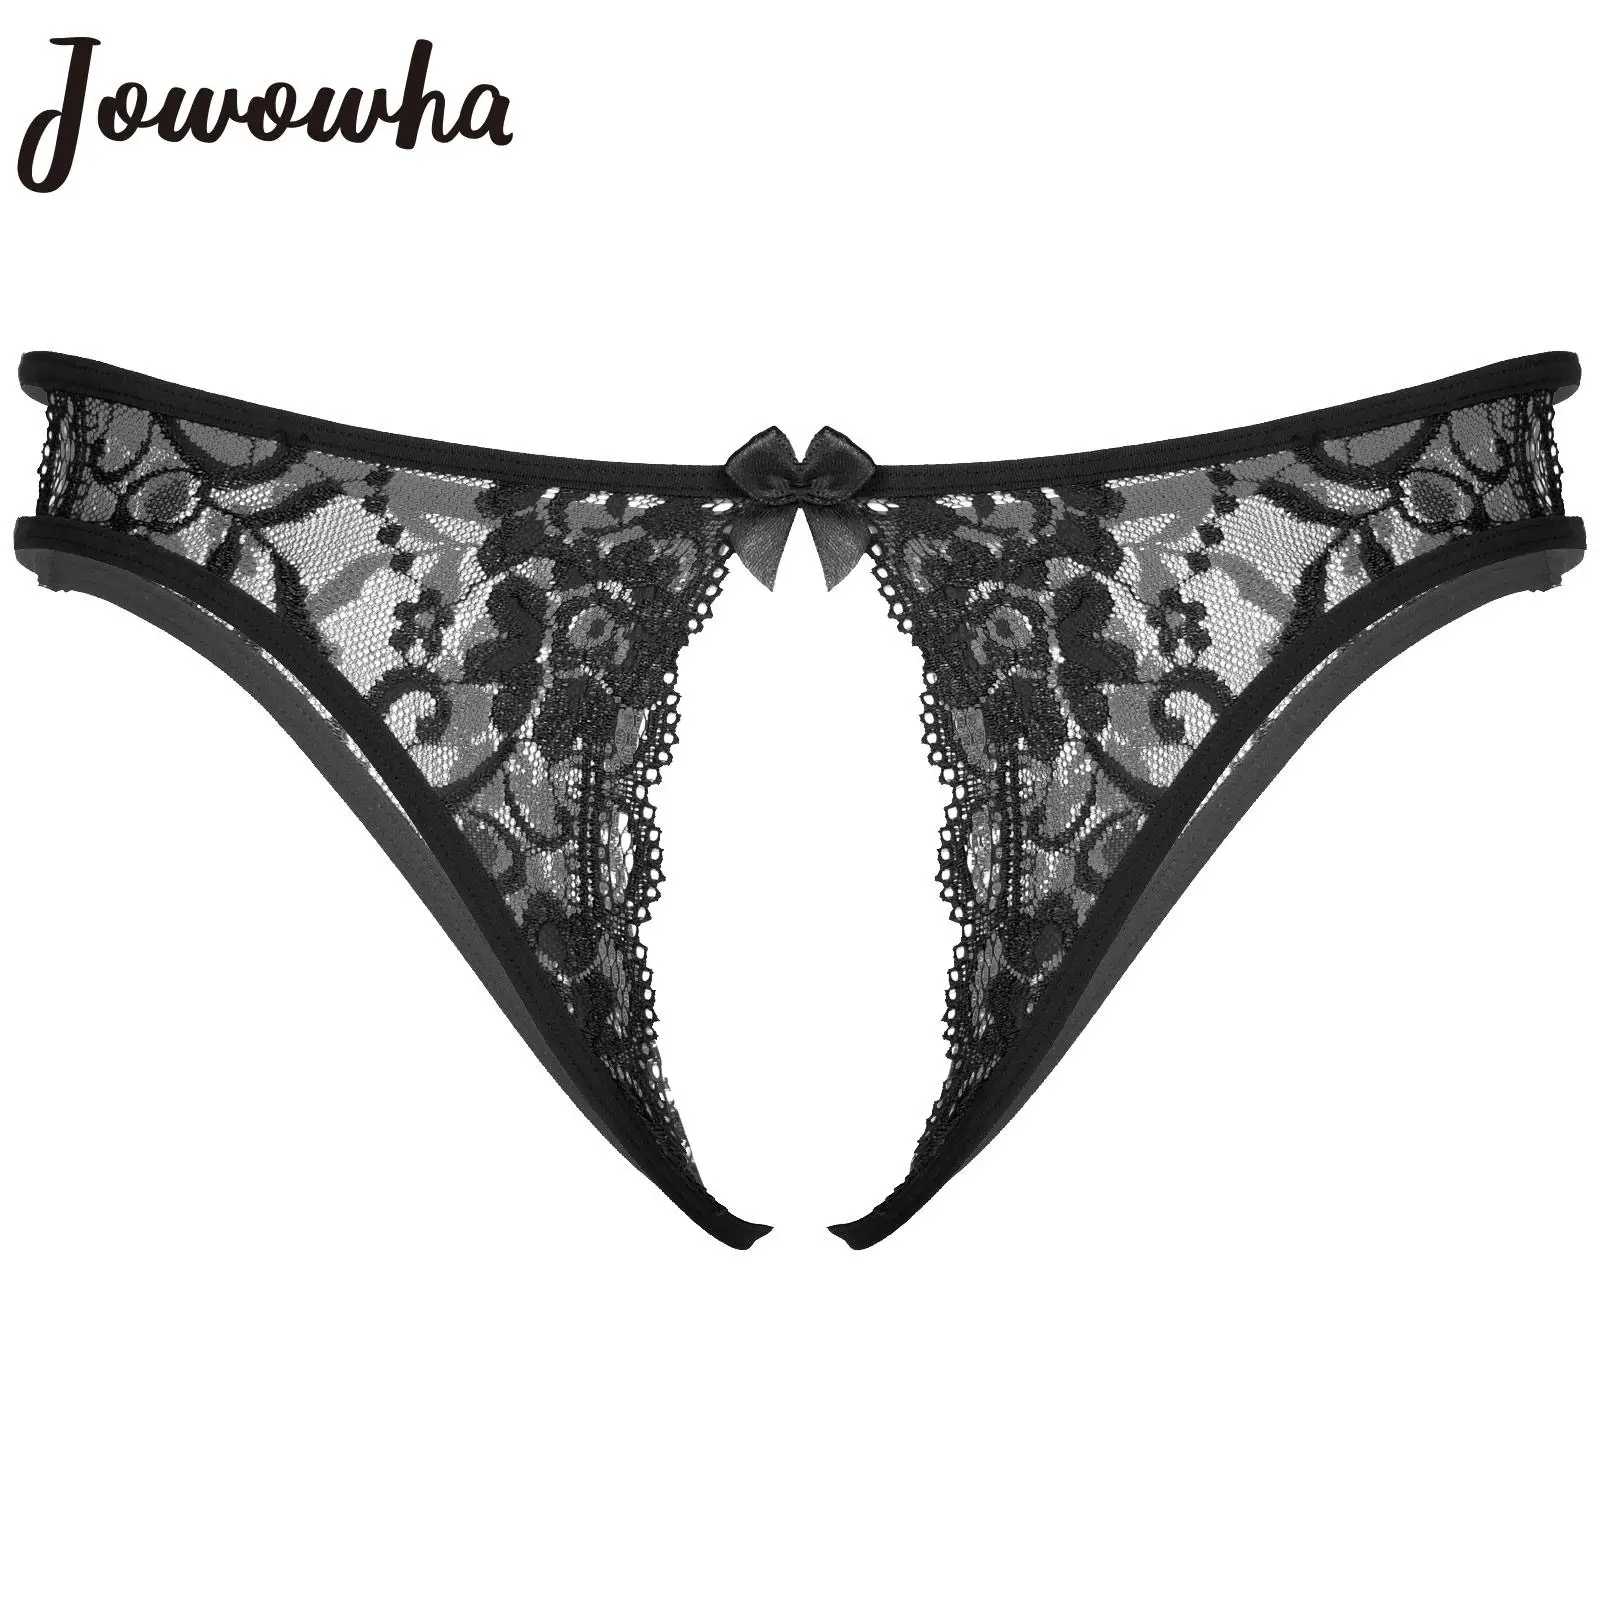 

Men Floral Lace Crotchless T-back Briefs Gay Sissy Sexy Hollow Out Low Waist Thongs Lingerie Underwear Male Underpants Nightwear